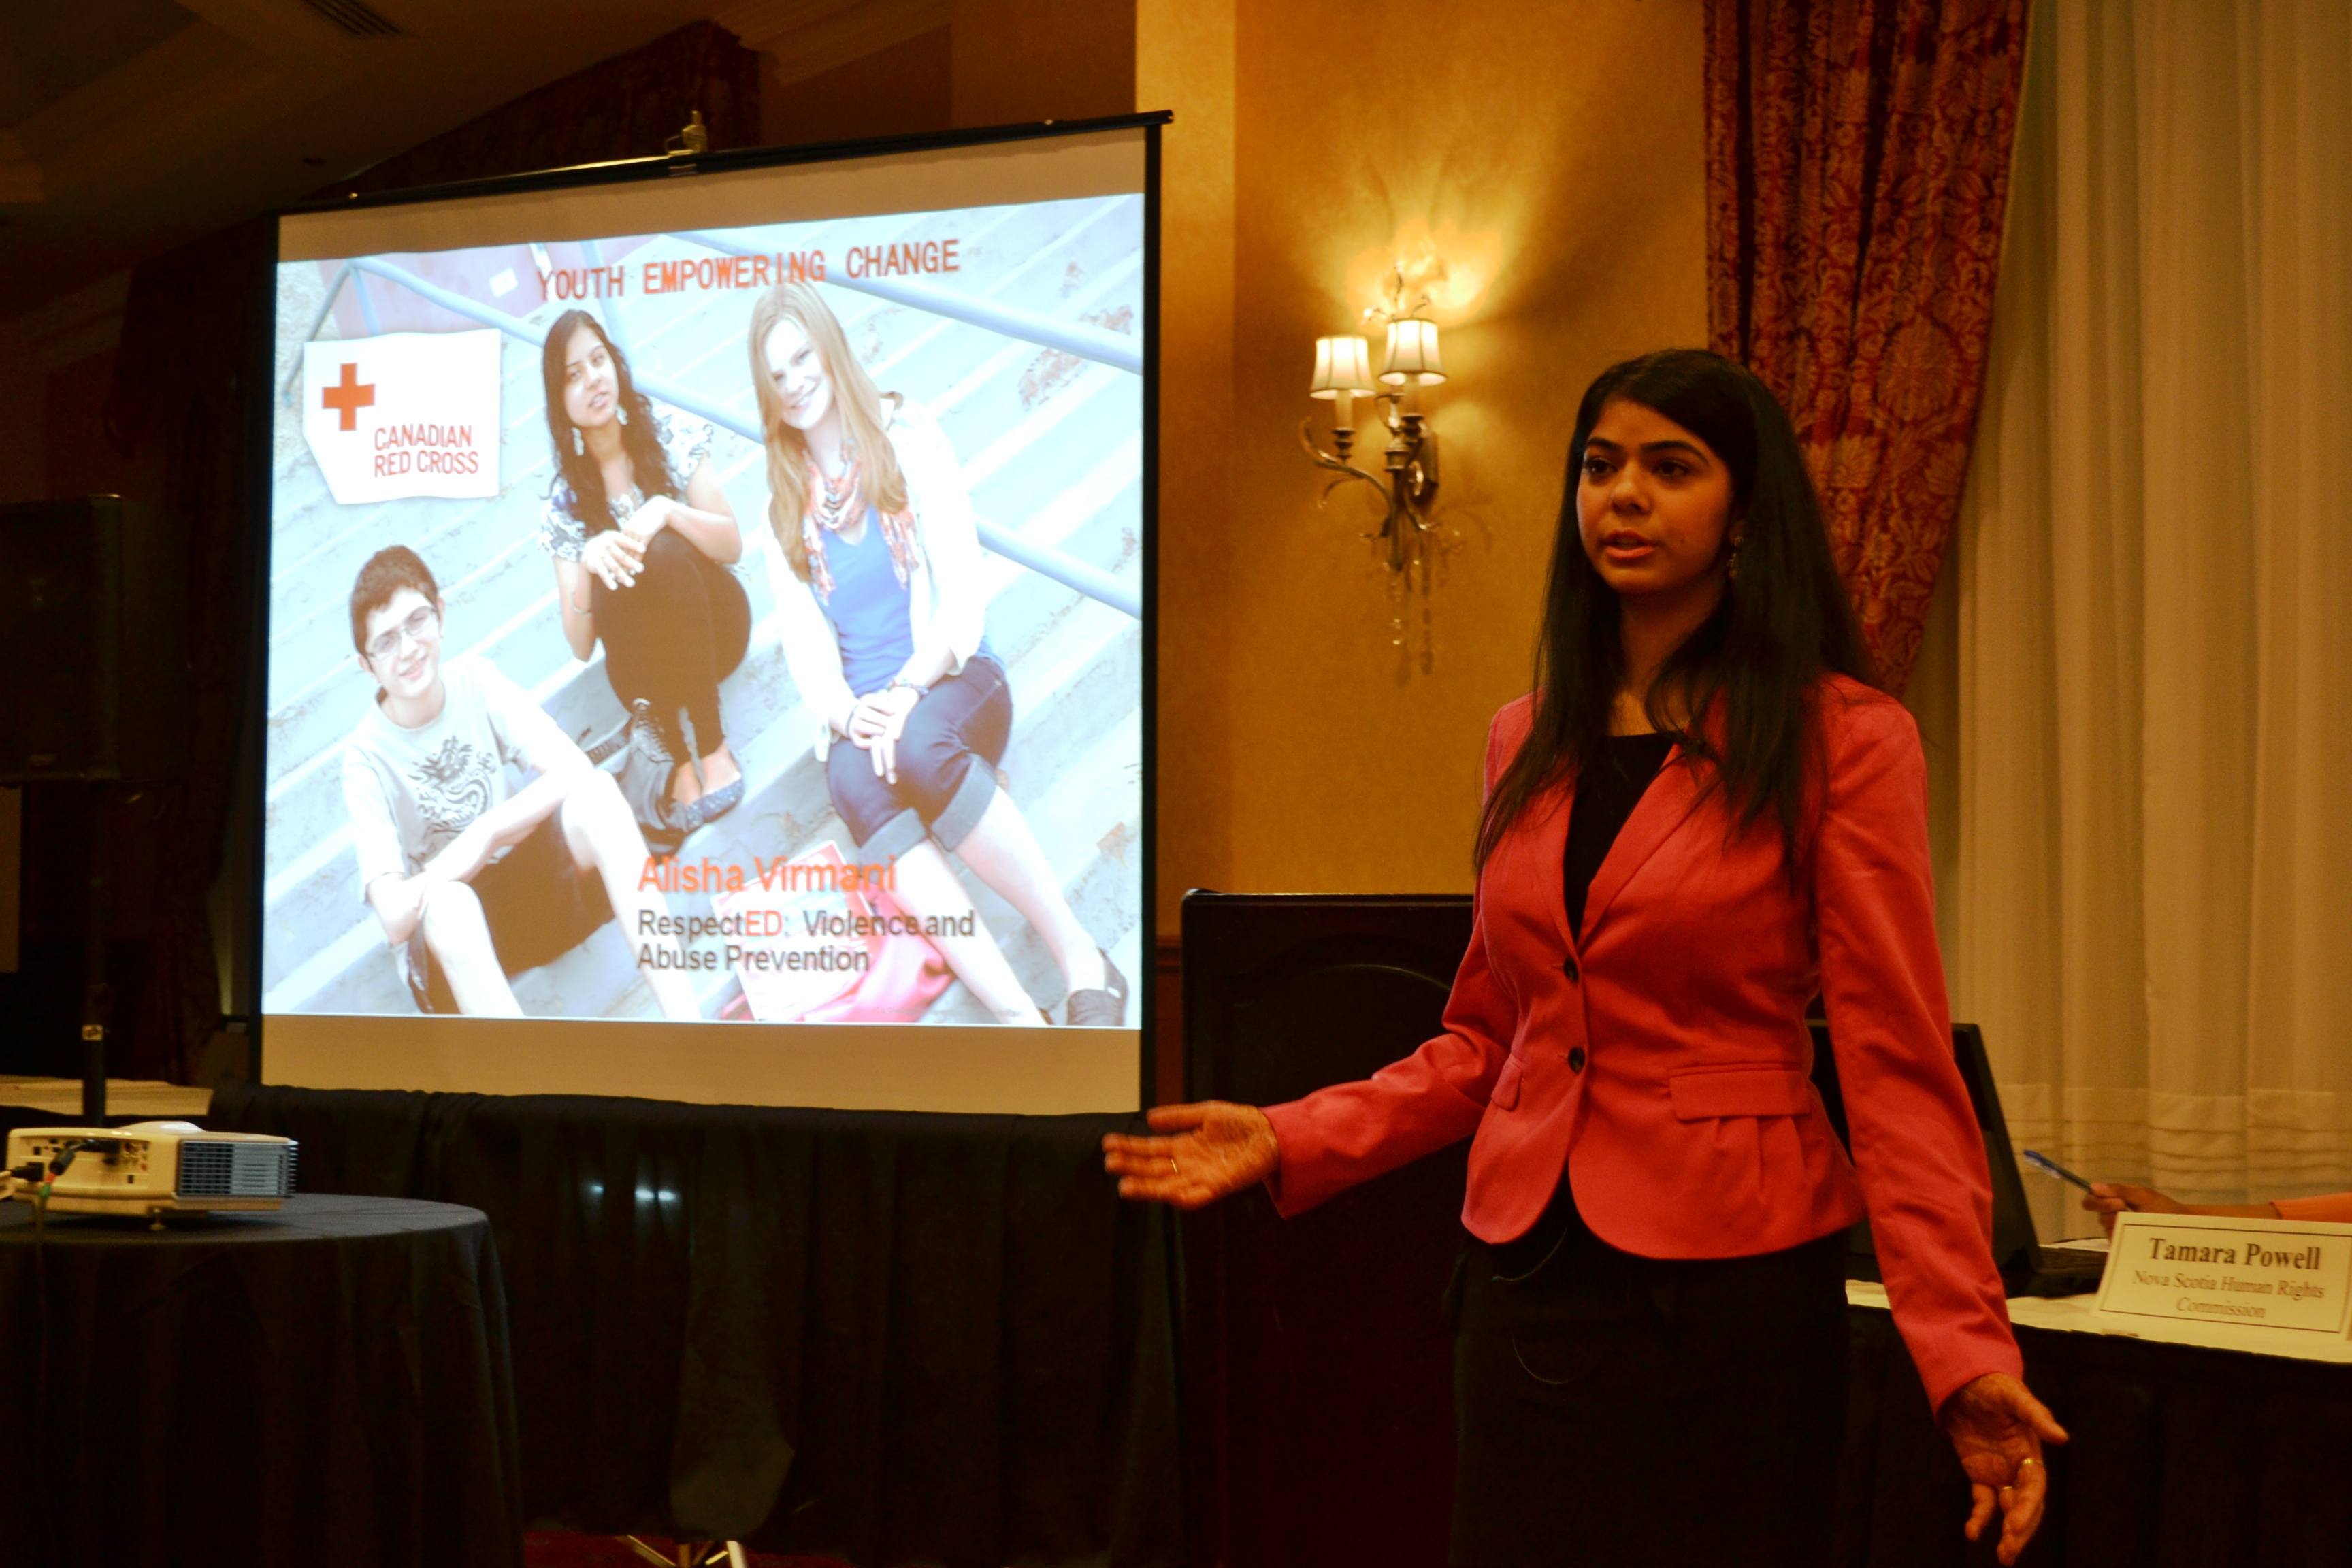 Alisha Virmani speaking about bullying at a recent conference on human rights